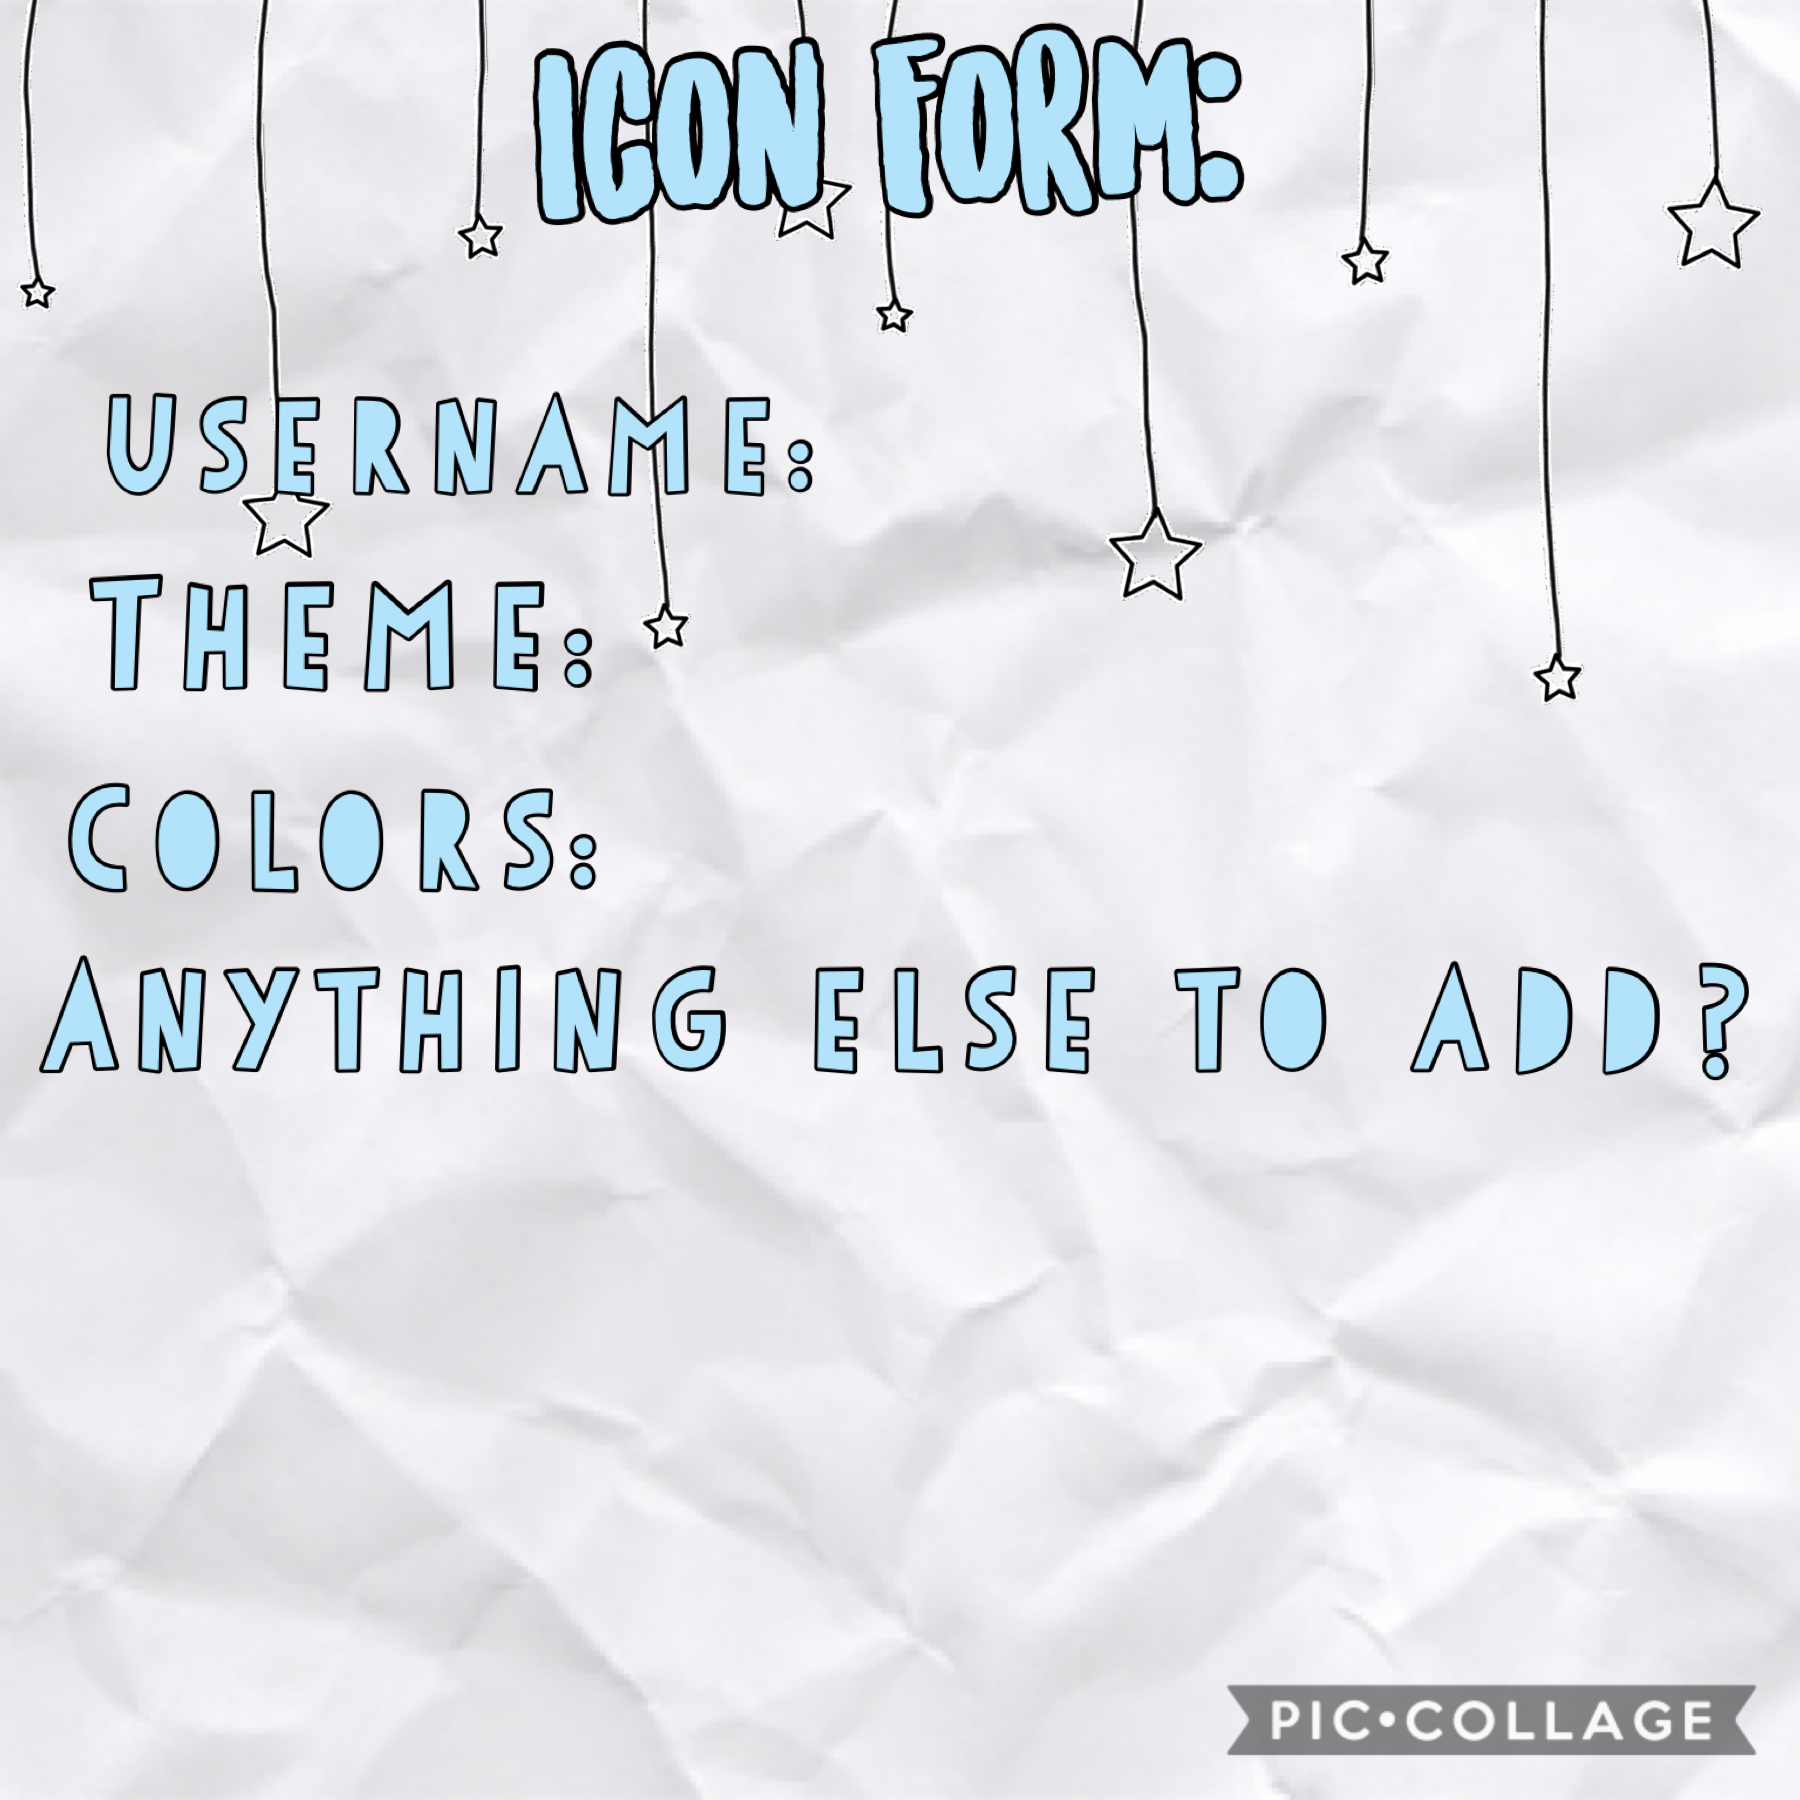 I will make icons if u fill out this form. Have fun!